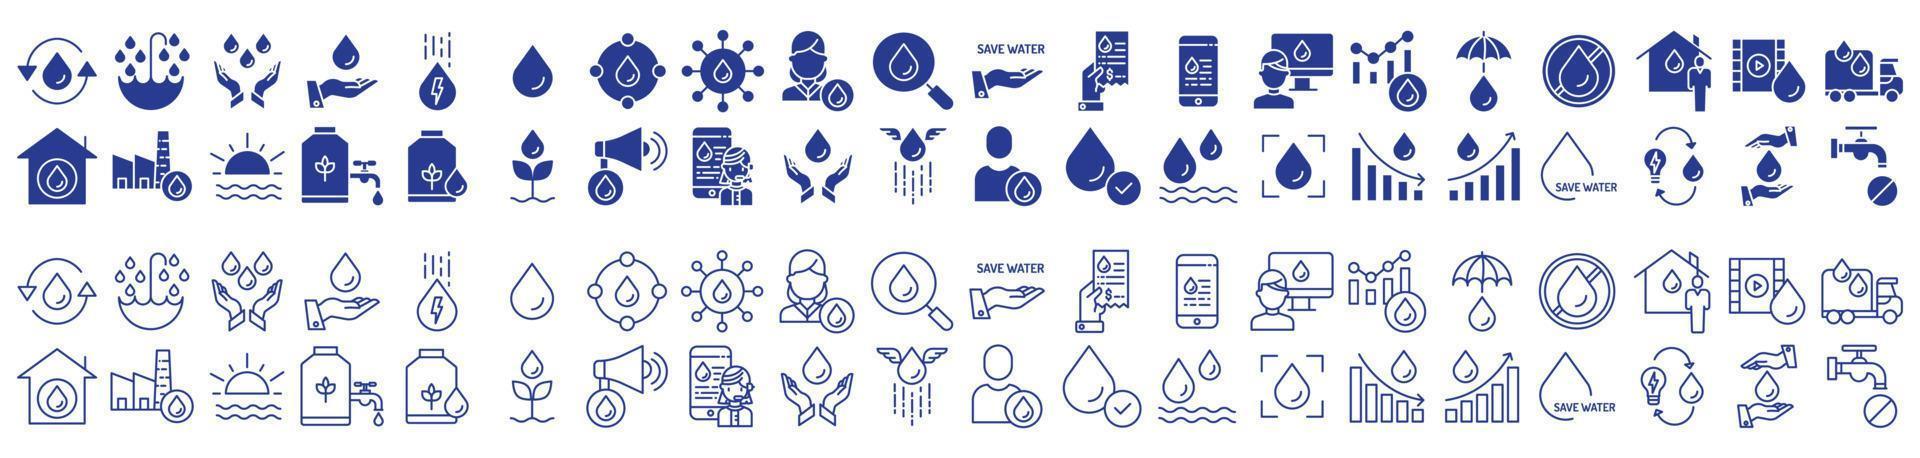 Collection of icons related to Water and waste management, including icons like drop, drip, liquid  and more. vector illustrations, Pixel Perfect